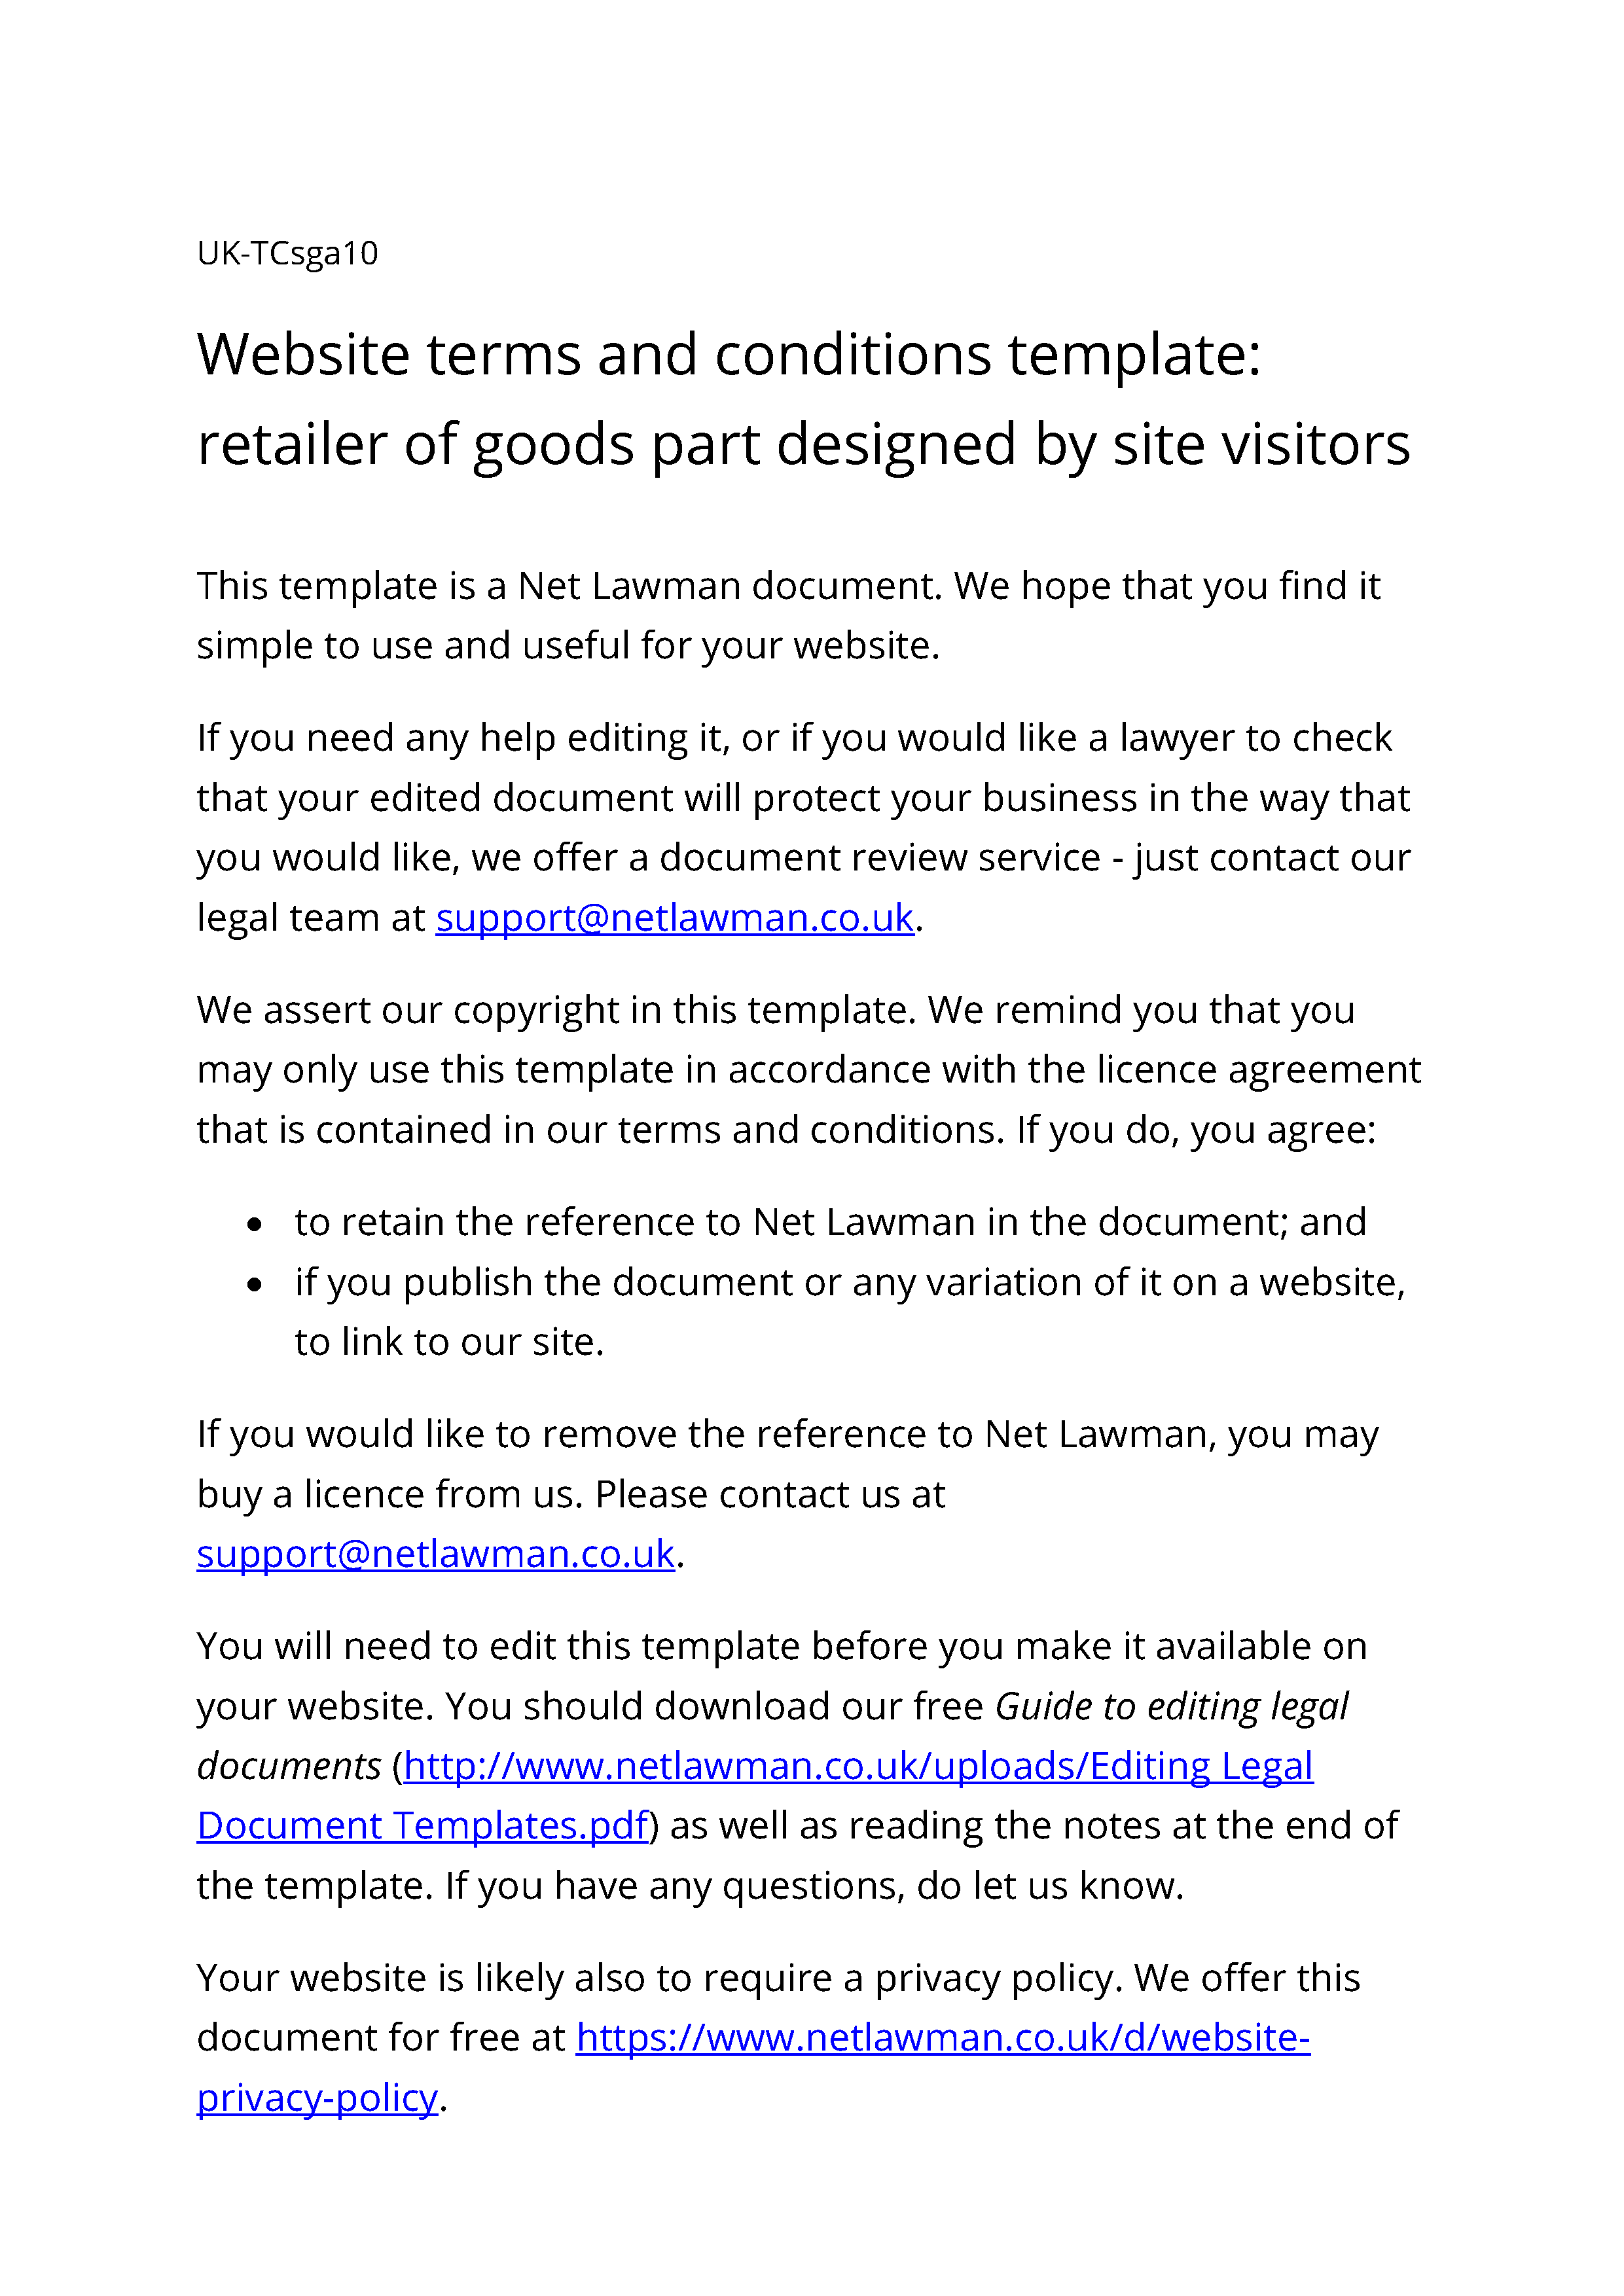 Sample page from the website terms for a custom design goods retailer